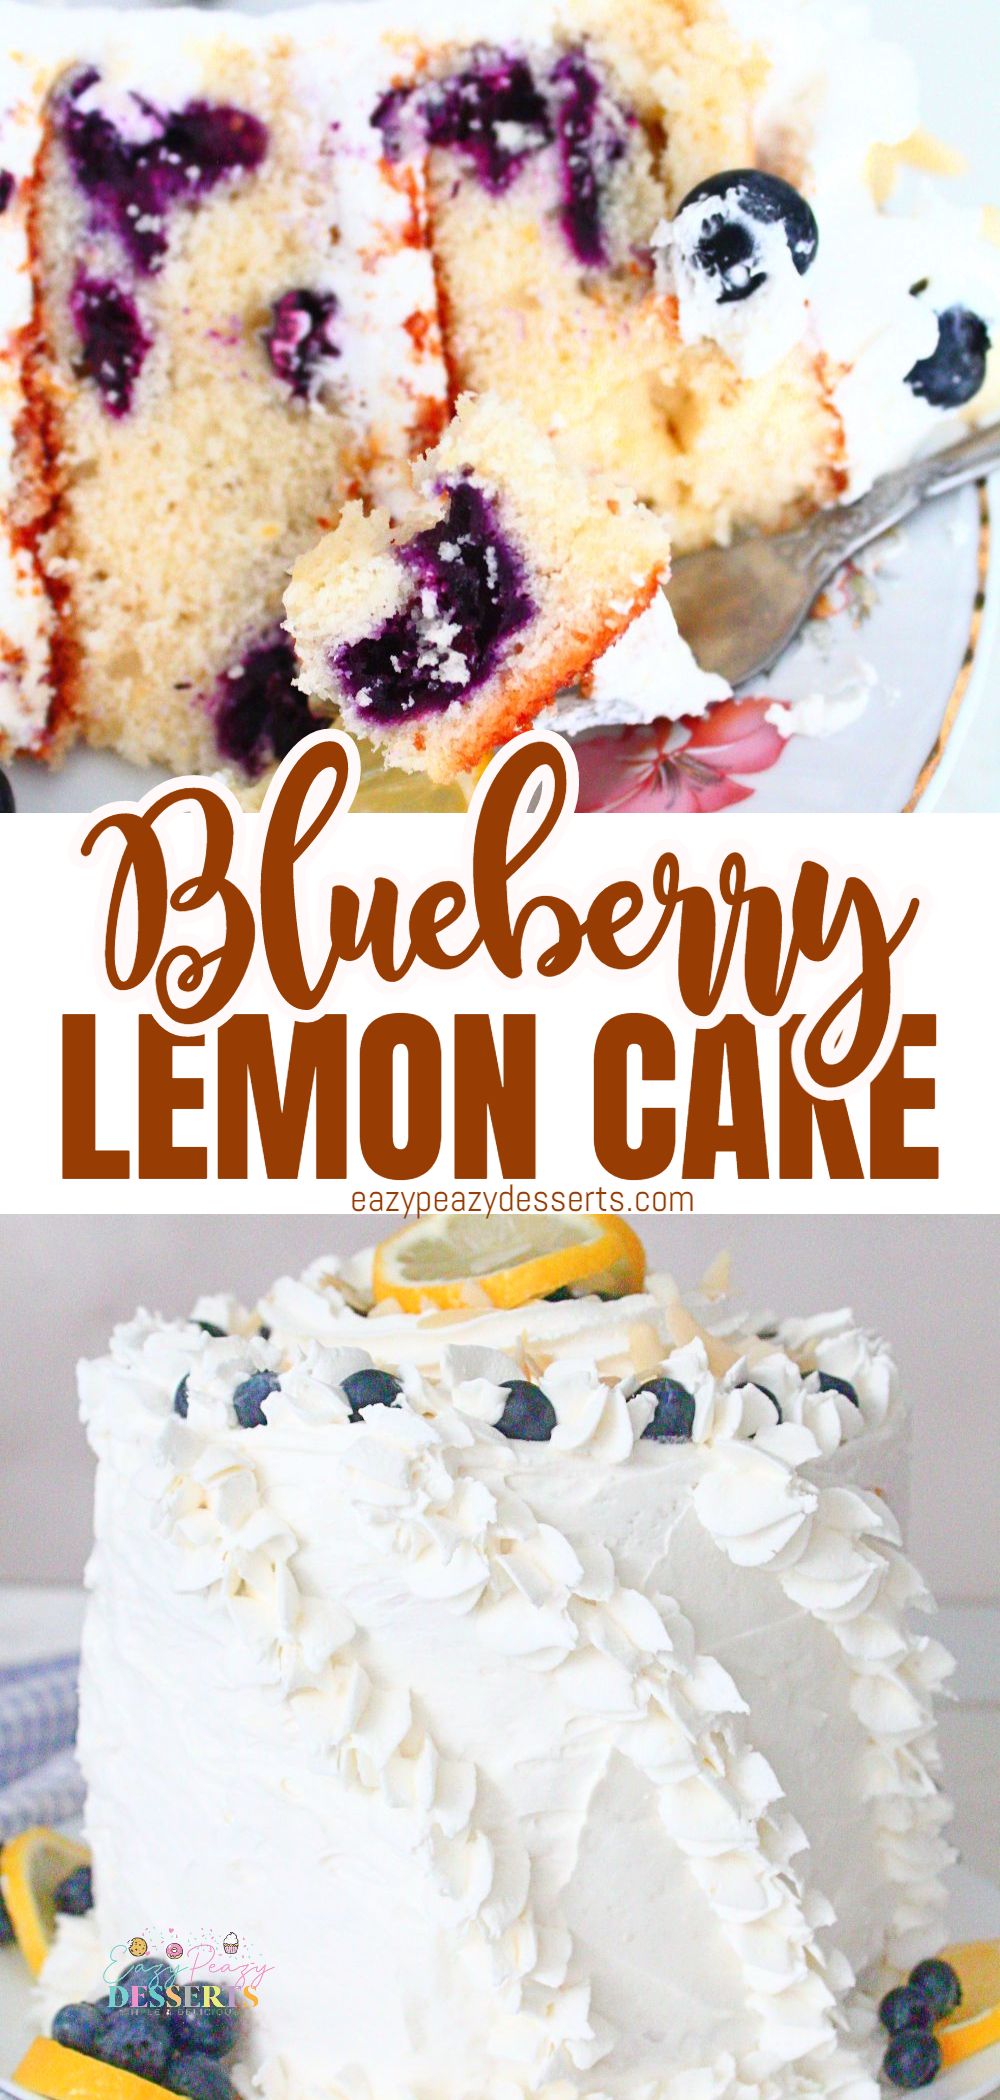 Photo collage of blueberry lemon cake, on a cake stand and a close up of a bite